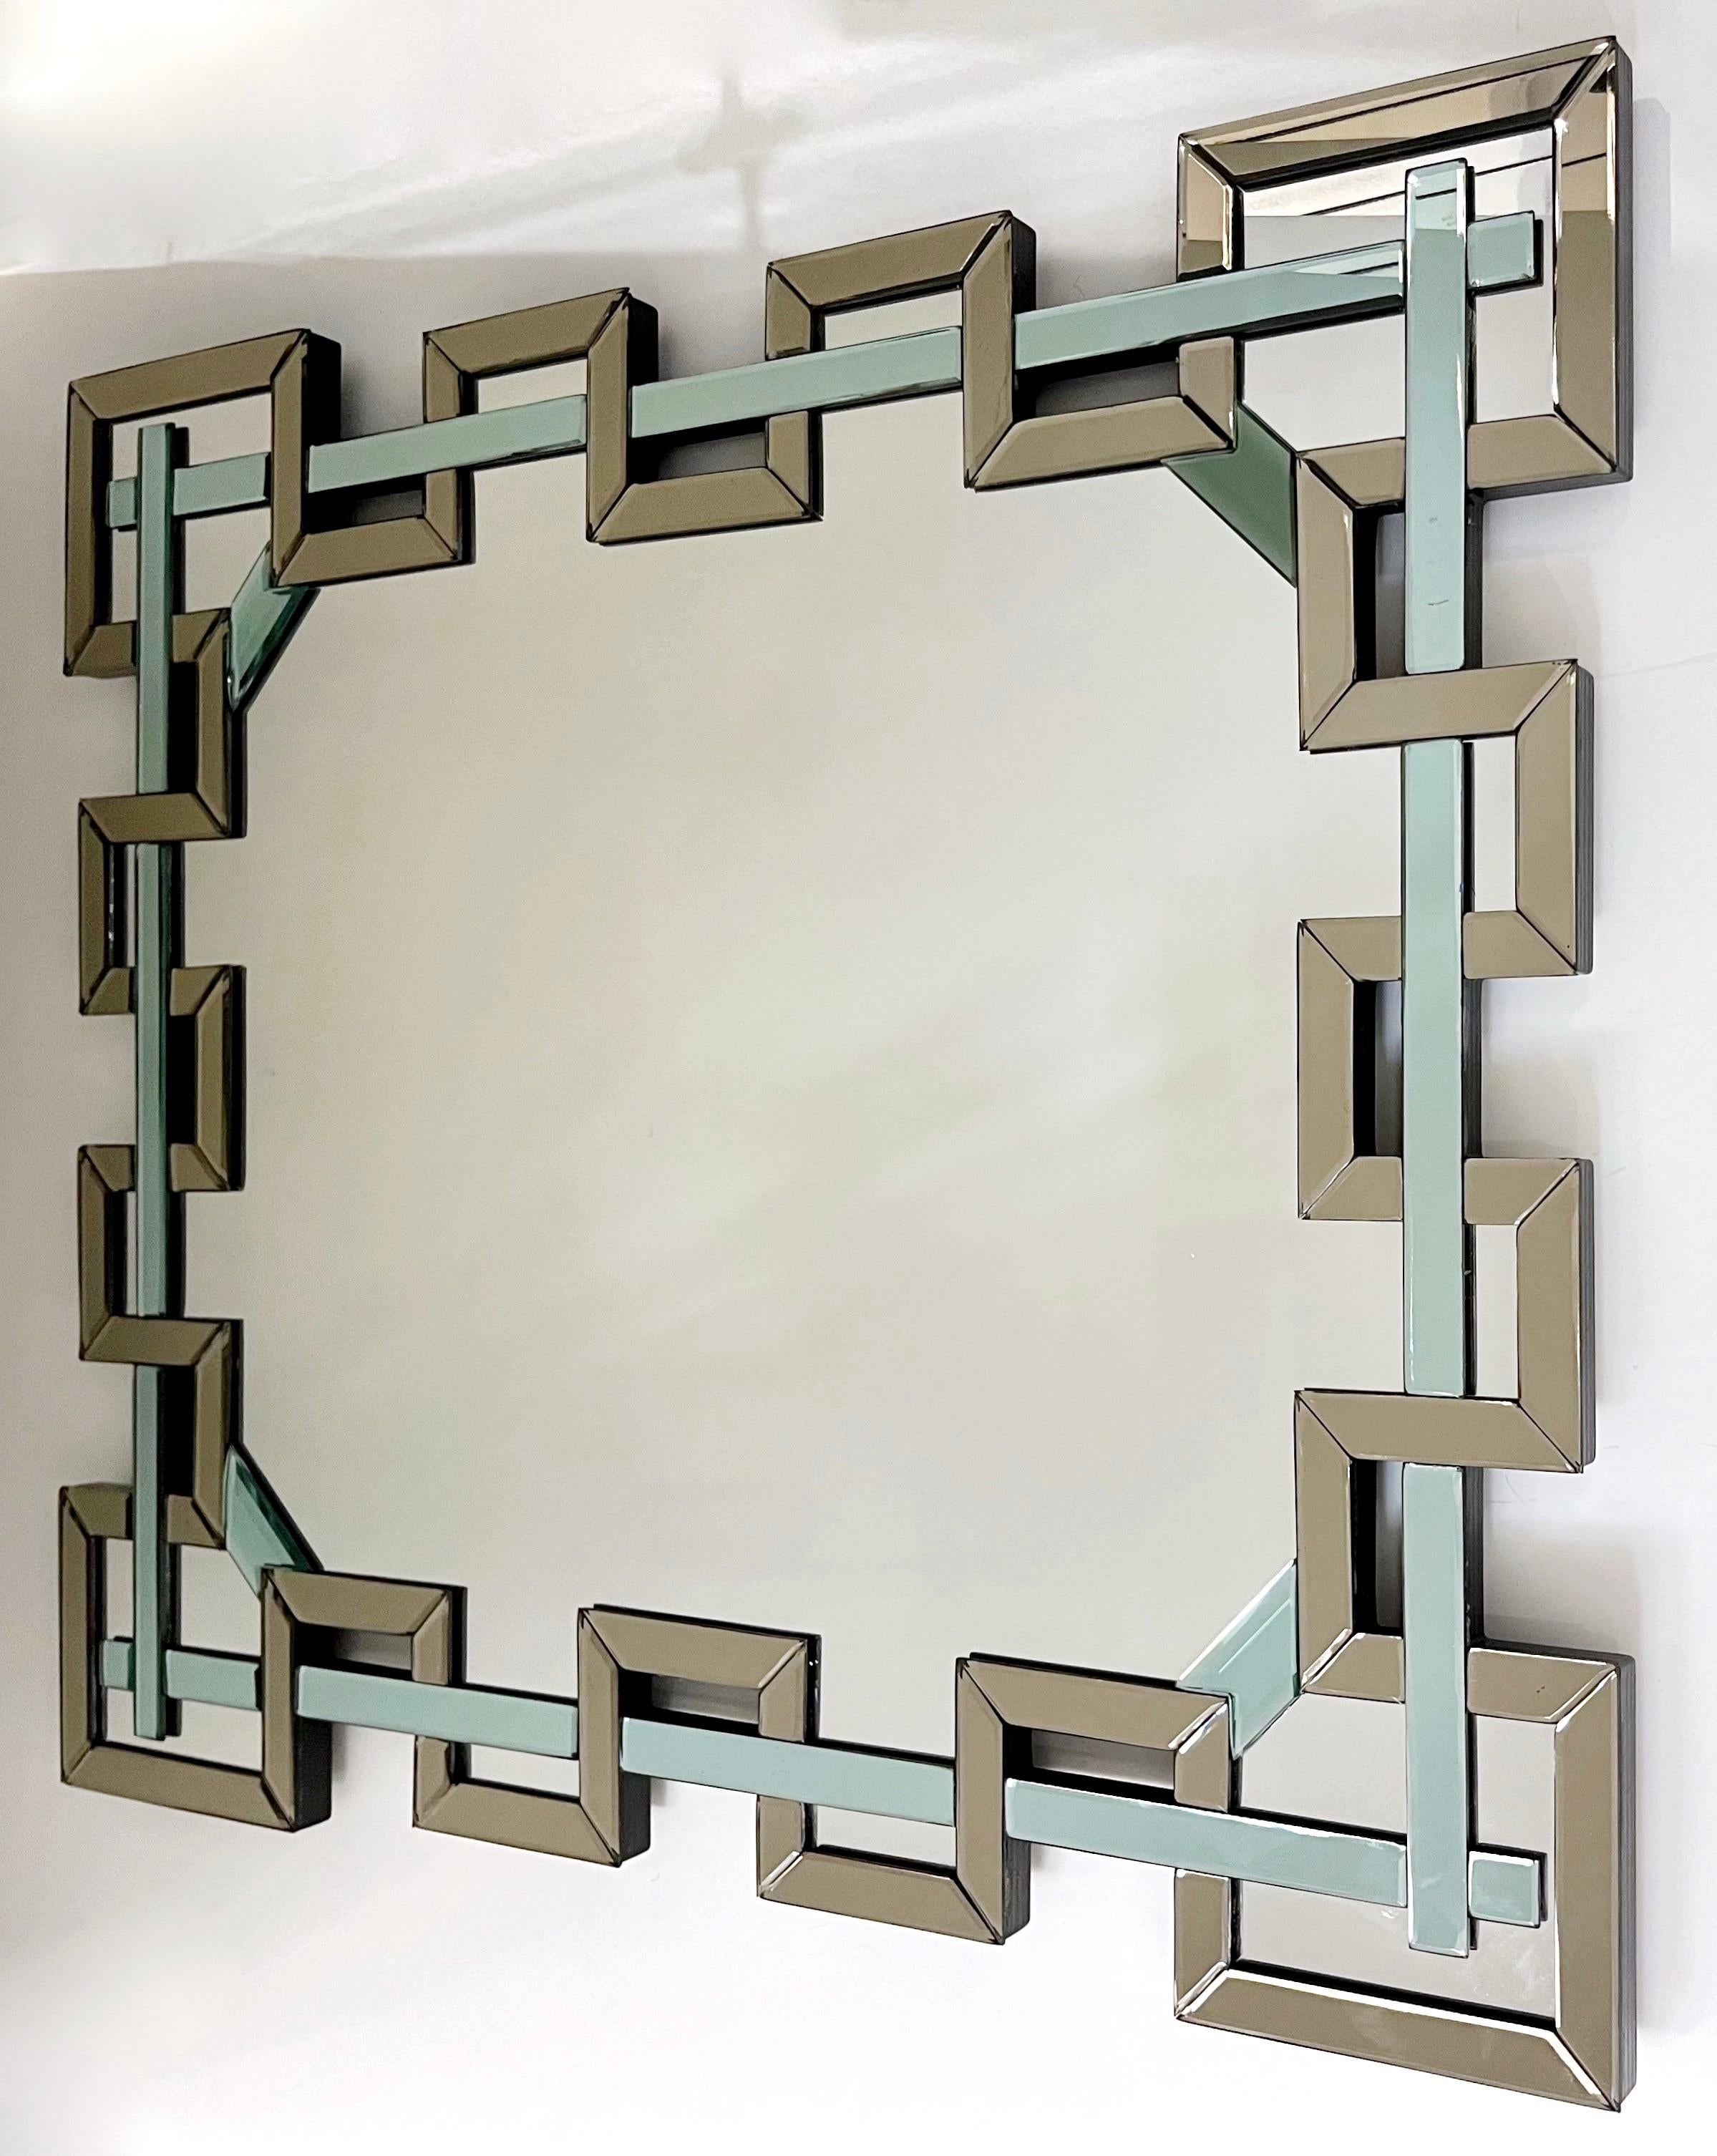 An exclusive Venetian rectangular mirror in Murano glass, entirely handcrafted in Italy with a unique modern architectural design of a crenelated decoration. High quality of execution: the border is finished with an antiqued beveled mirror edge in